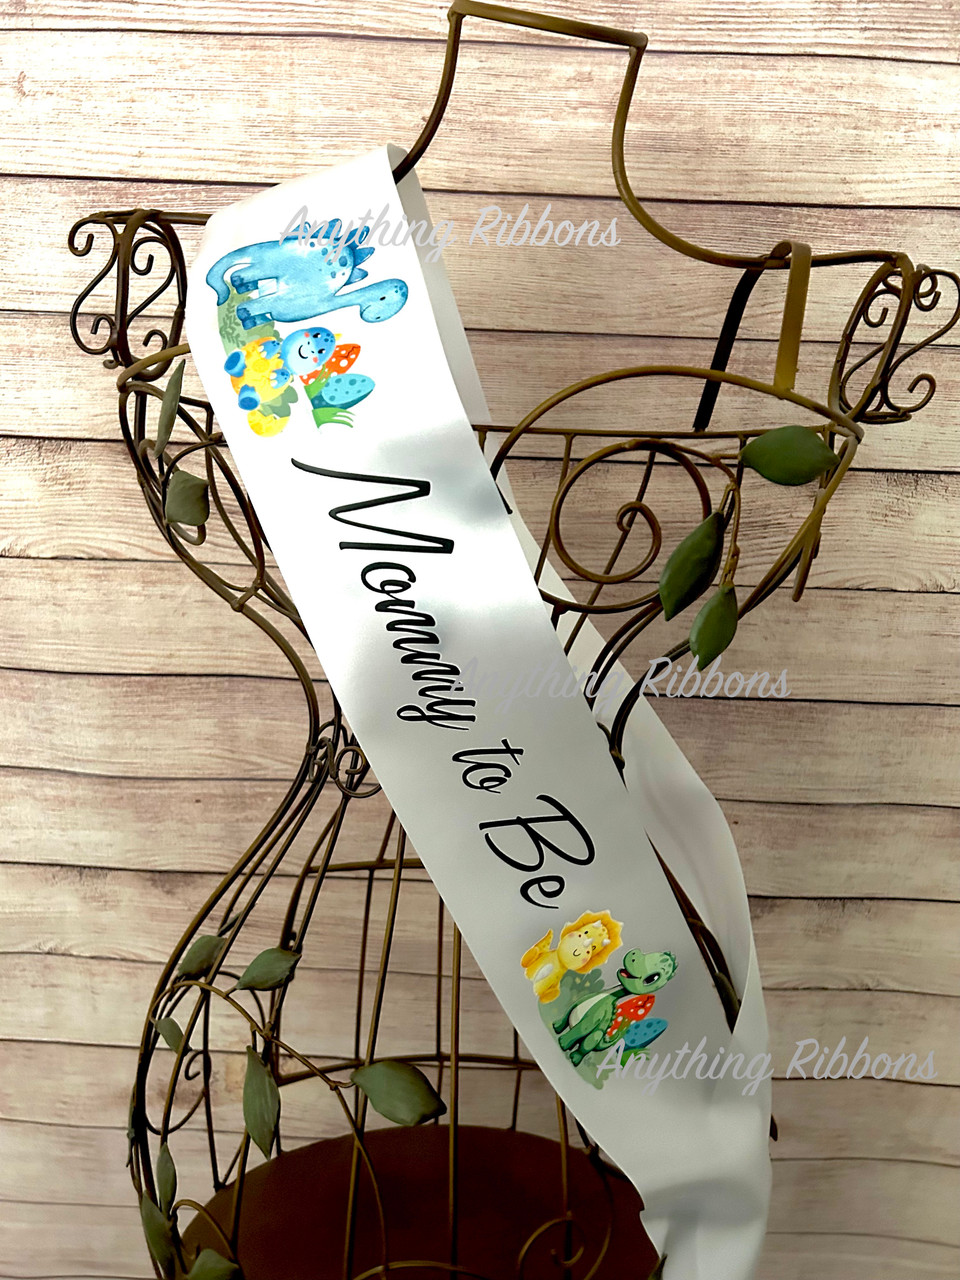 Dinosaur Baby Shower Sash or Pins for Daddy or Mommy to Be Pin to